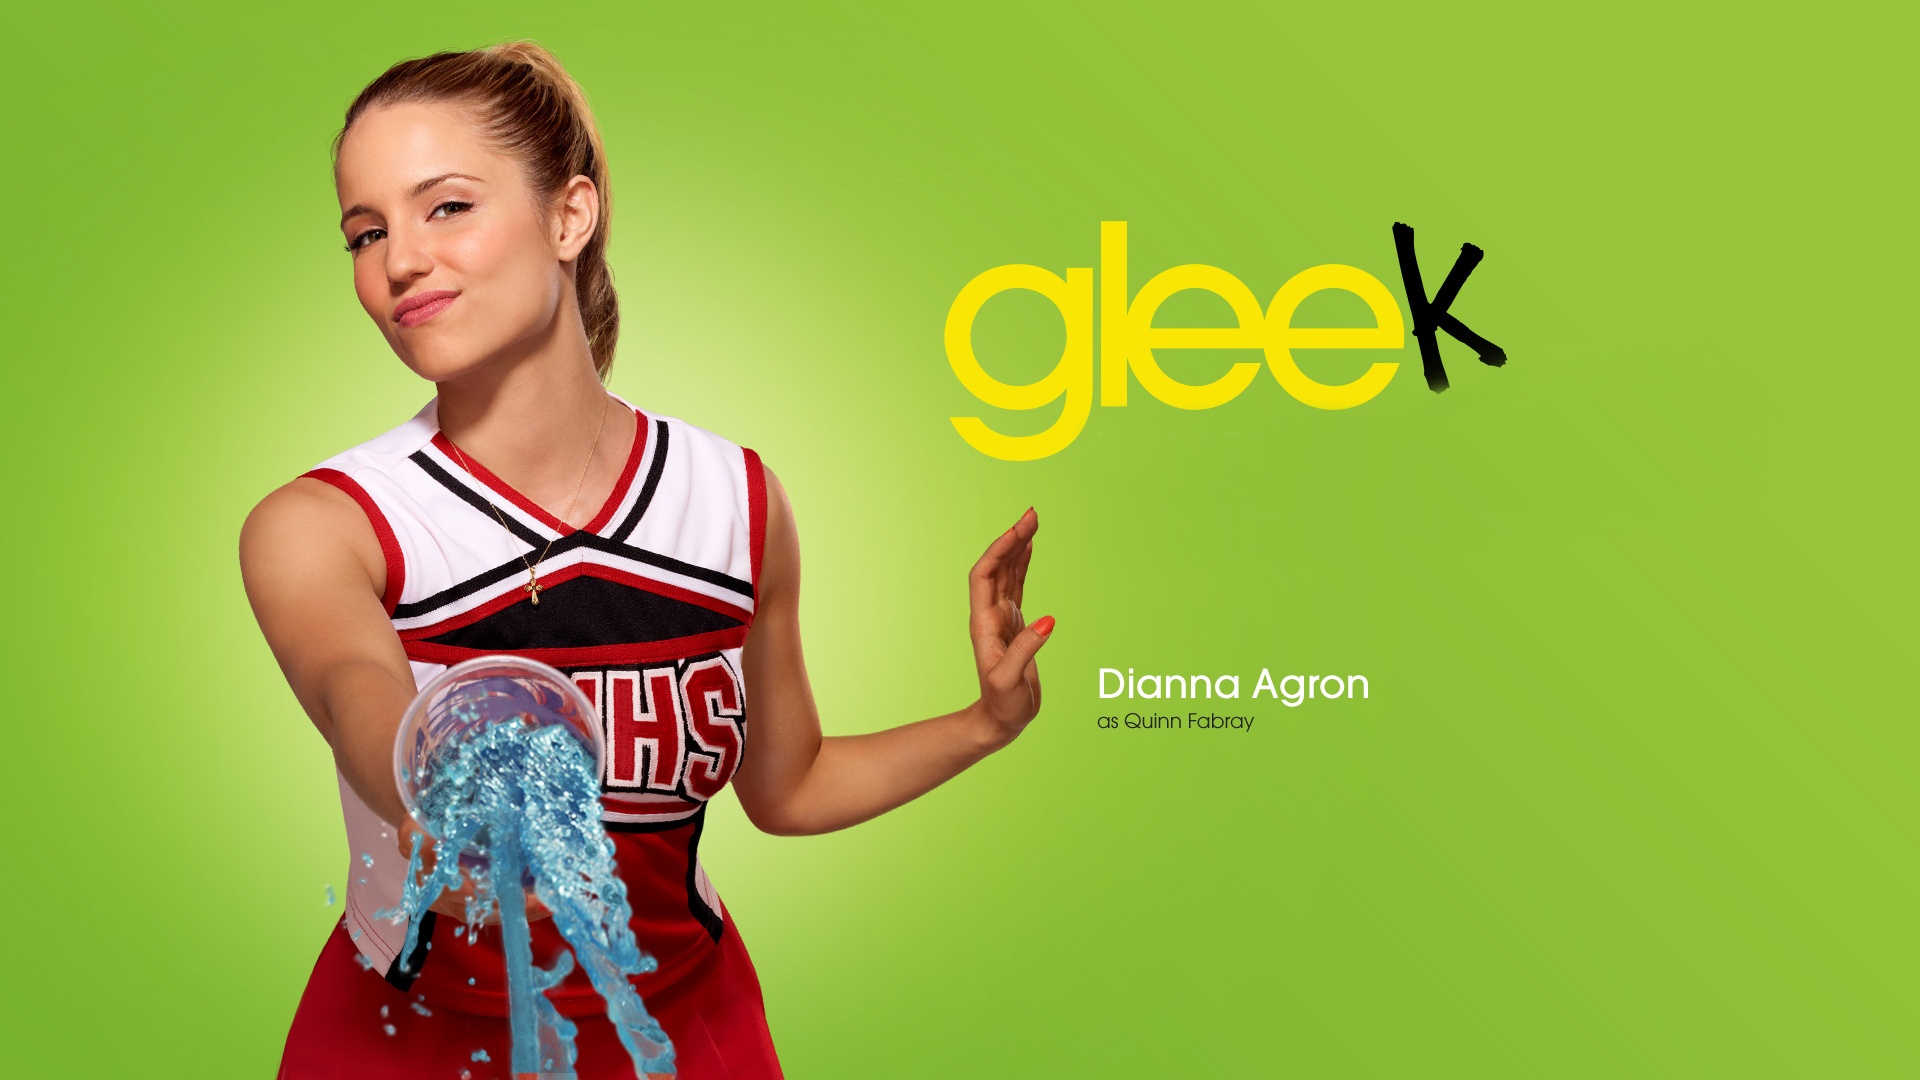 Glee's Dianna Agron Wallpapers | HD Wallpapers